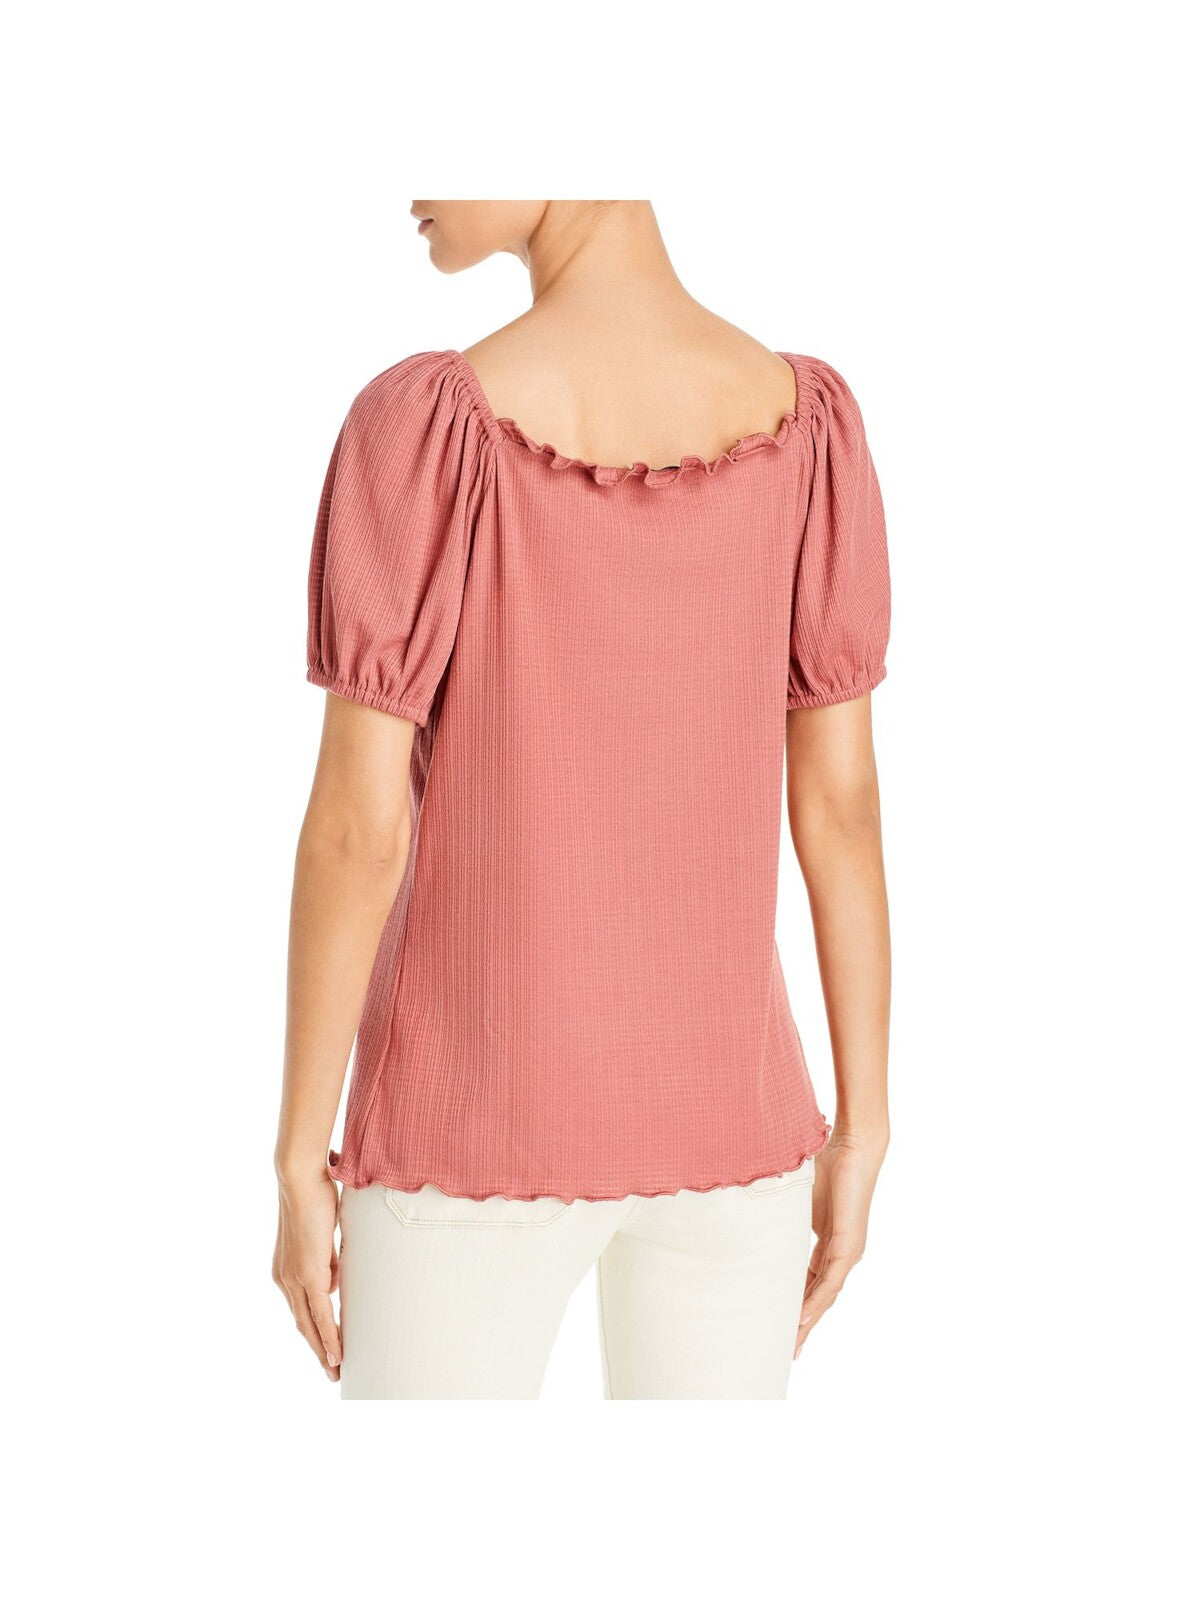 STATUS BY CHENAULT Womens Pink Stretch Ruffled Pleated Scalloped Ruched Pouf Sleeve Sweetheart Neckline Top S